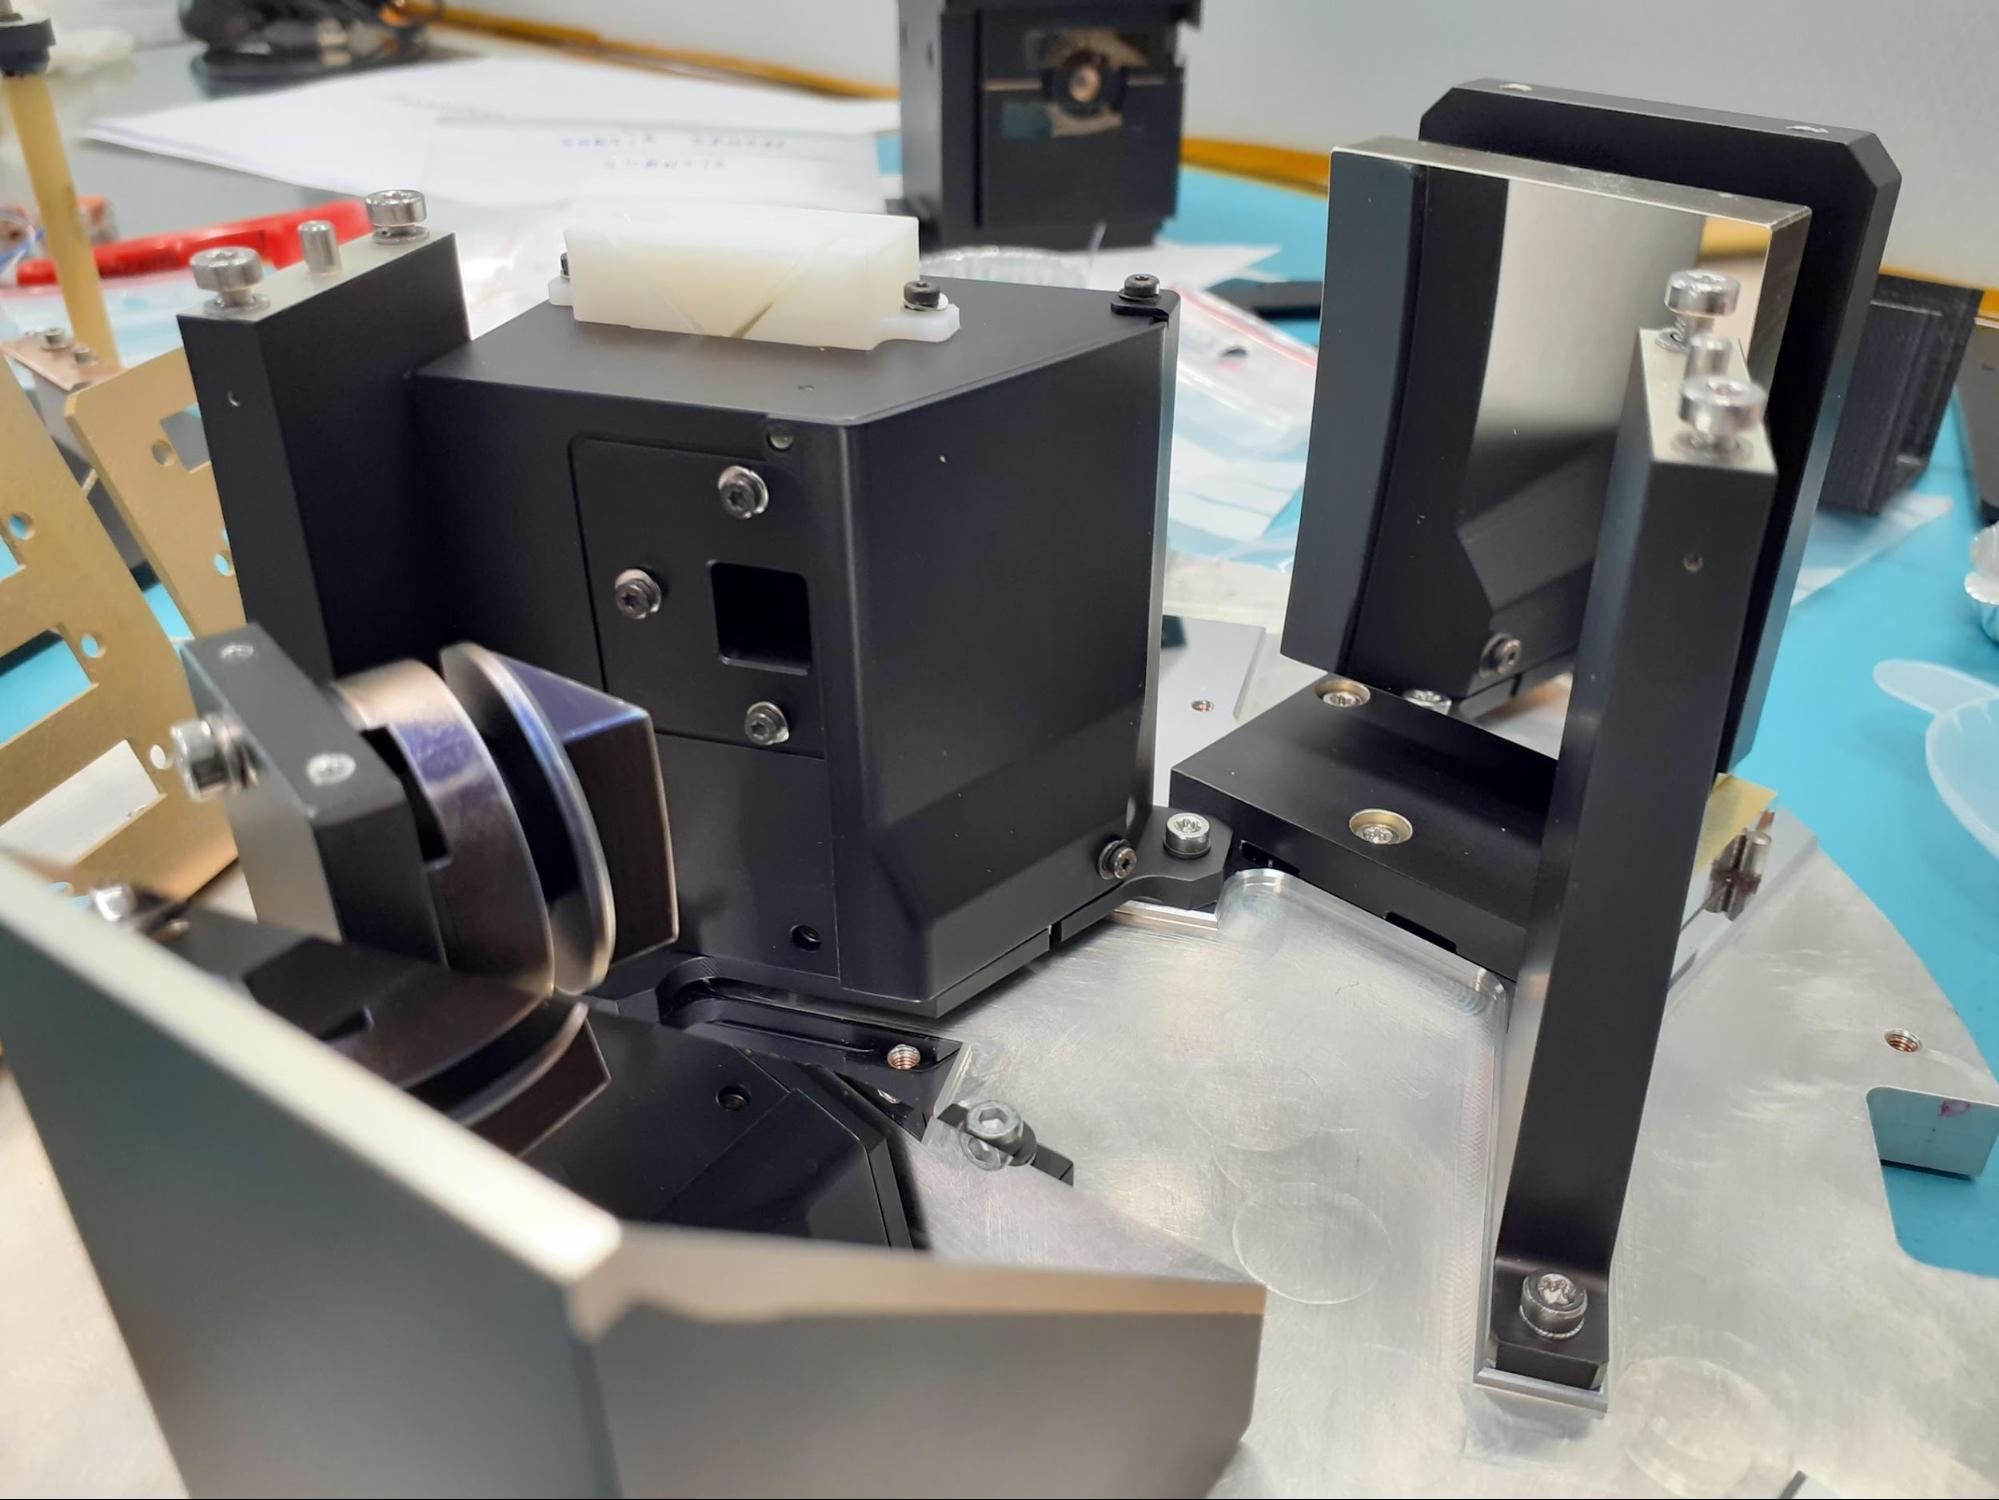 Close-up view of the collimator system of the Quantix test bench. The collimator delivers a uniform illumination on the detector under test so that each pixel of the detector sees the same photon flux. © CEA